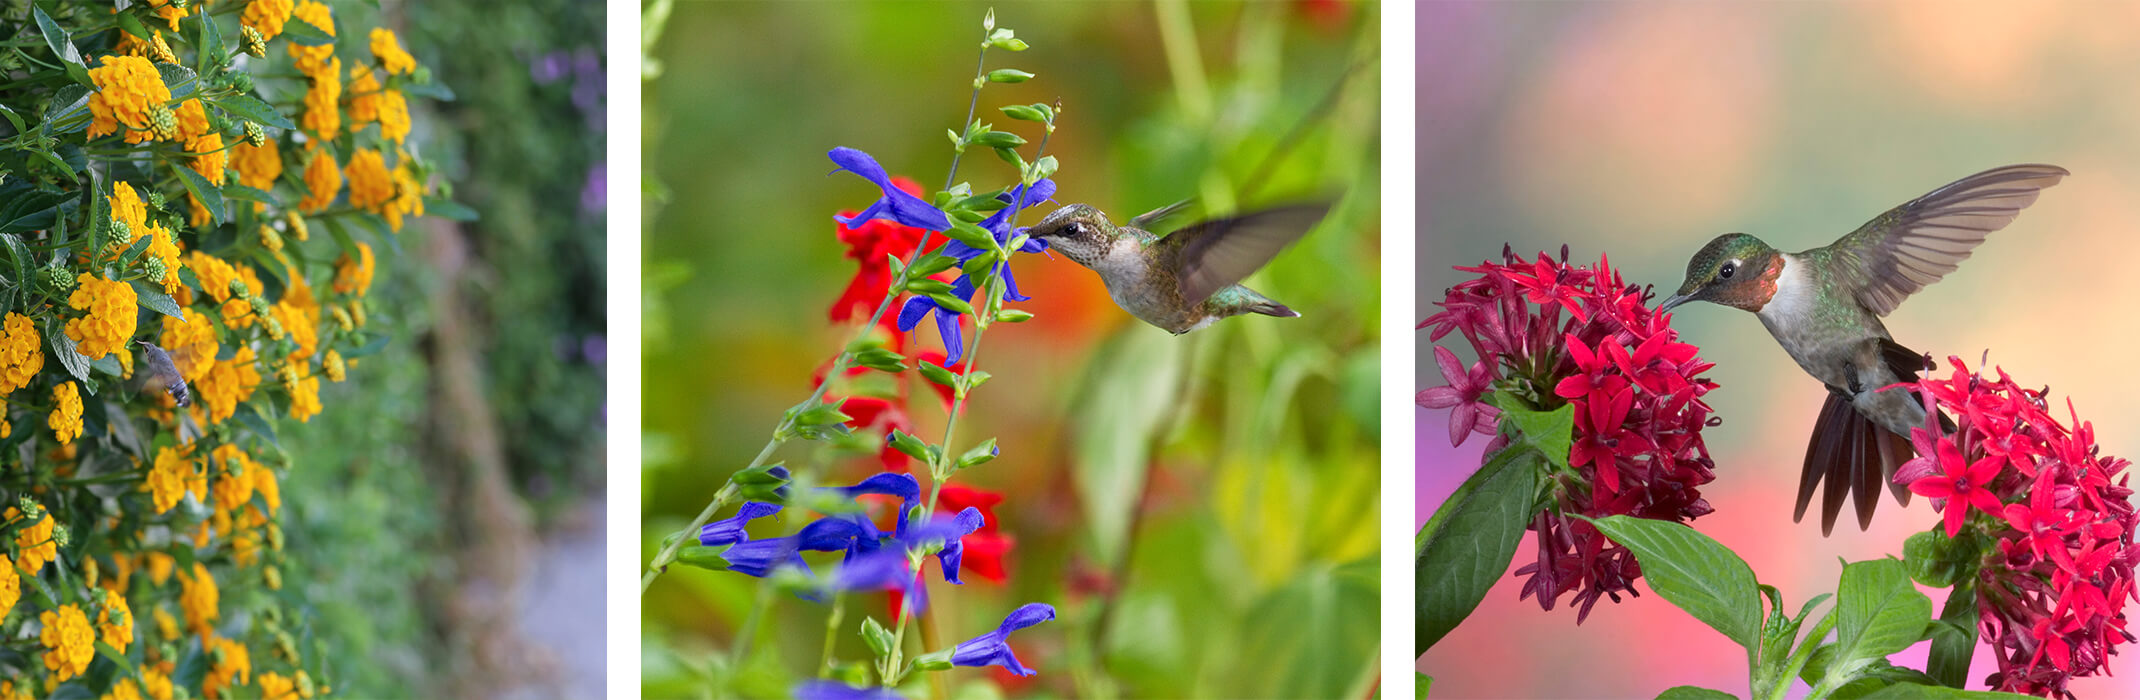 3 images with hummingbirds - with yellow lantana,  with blue sage, and with pink pentas